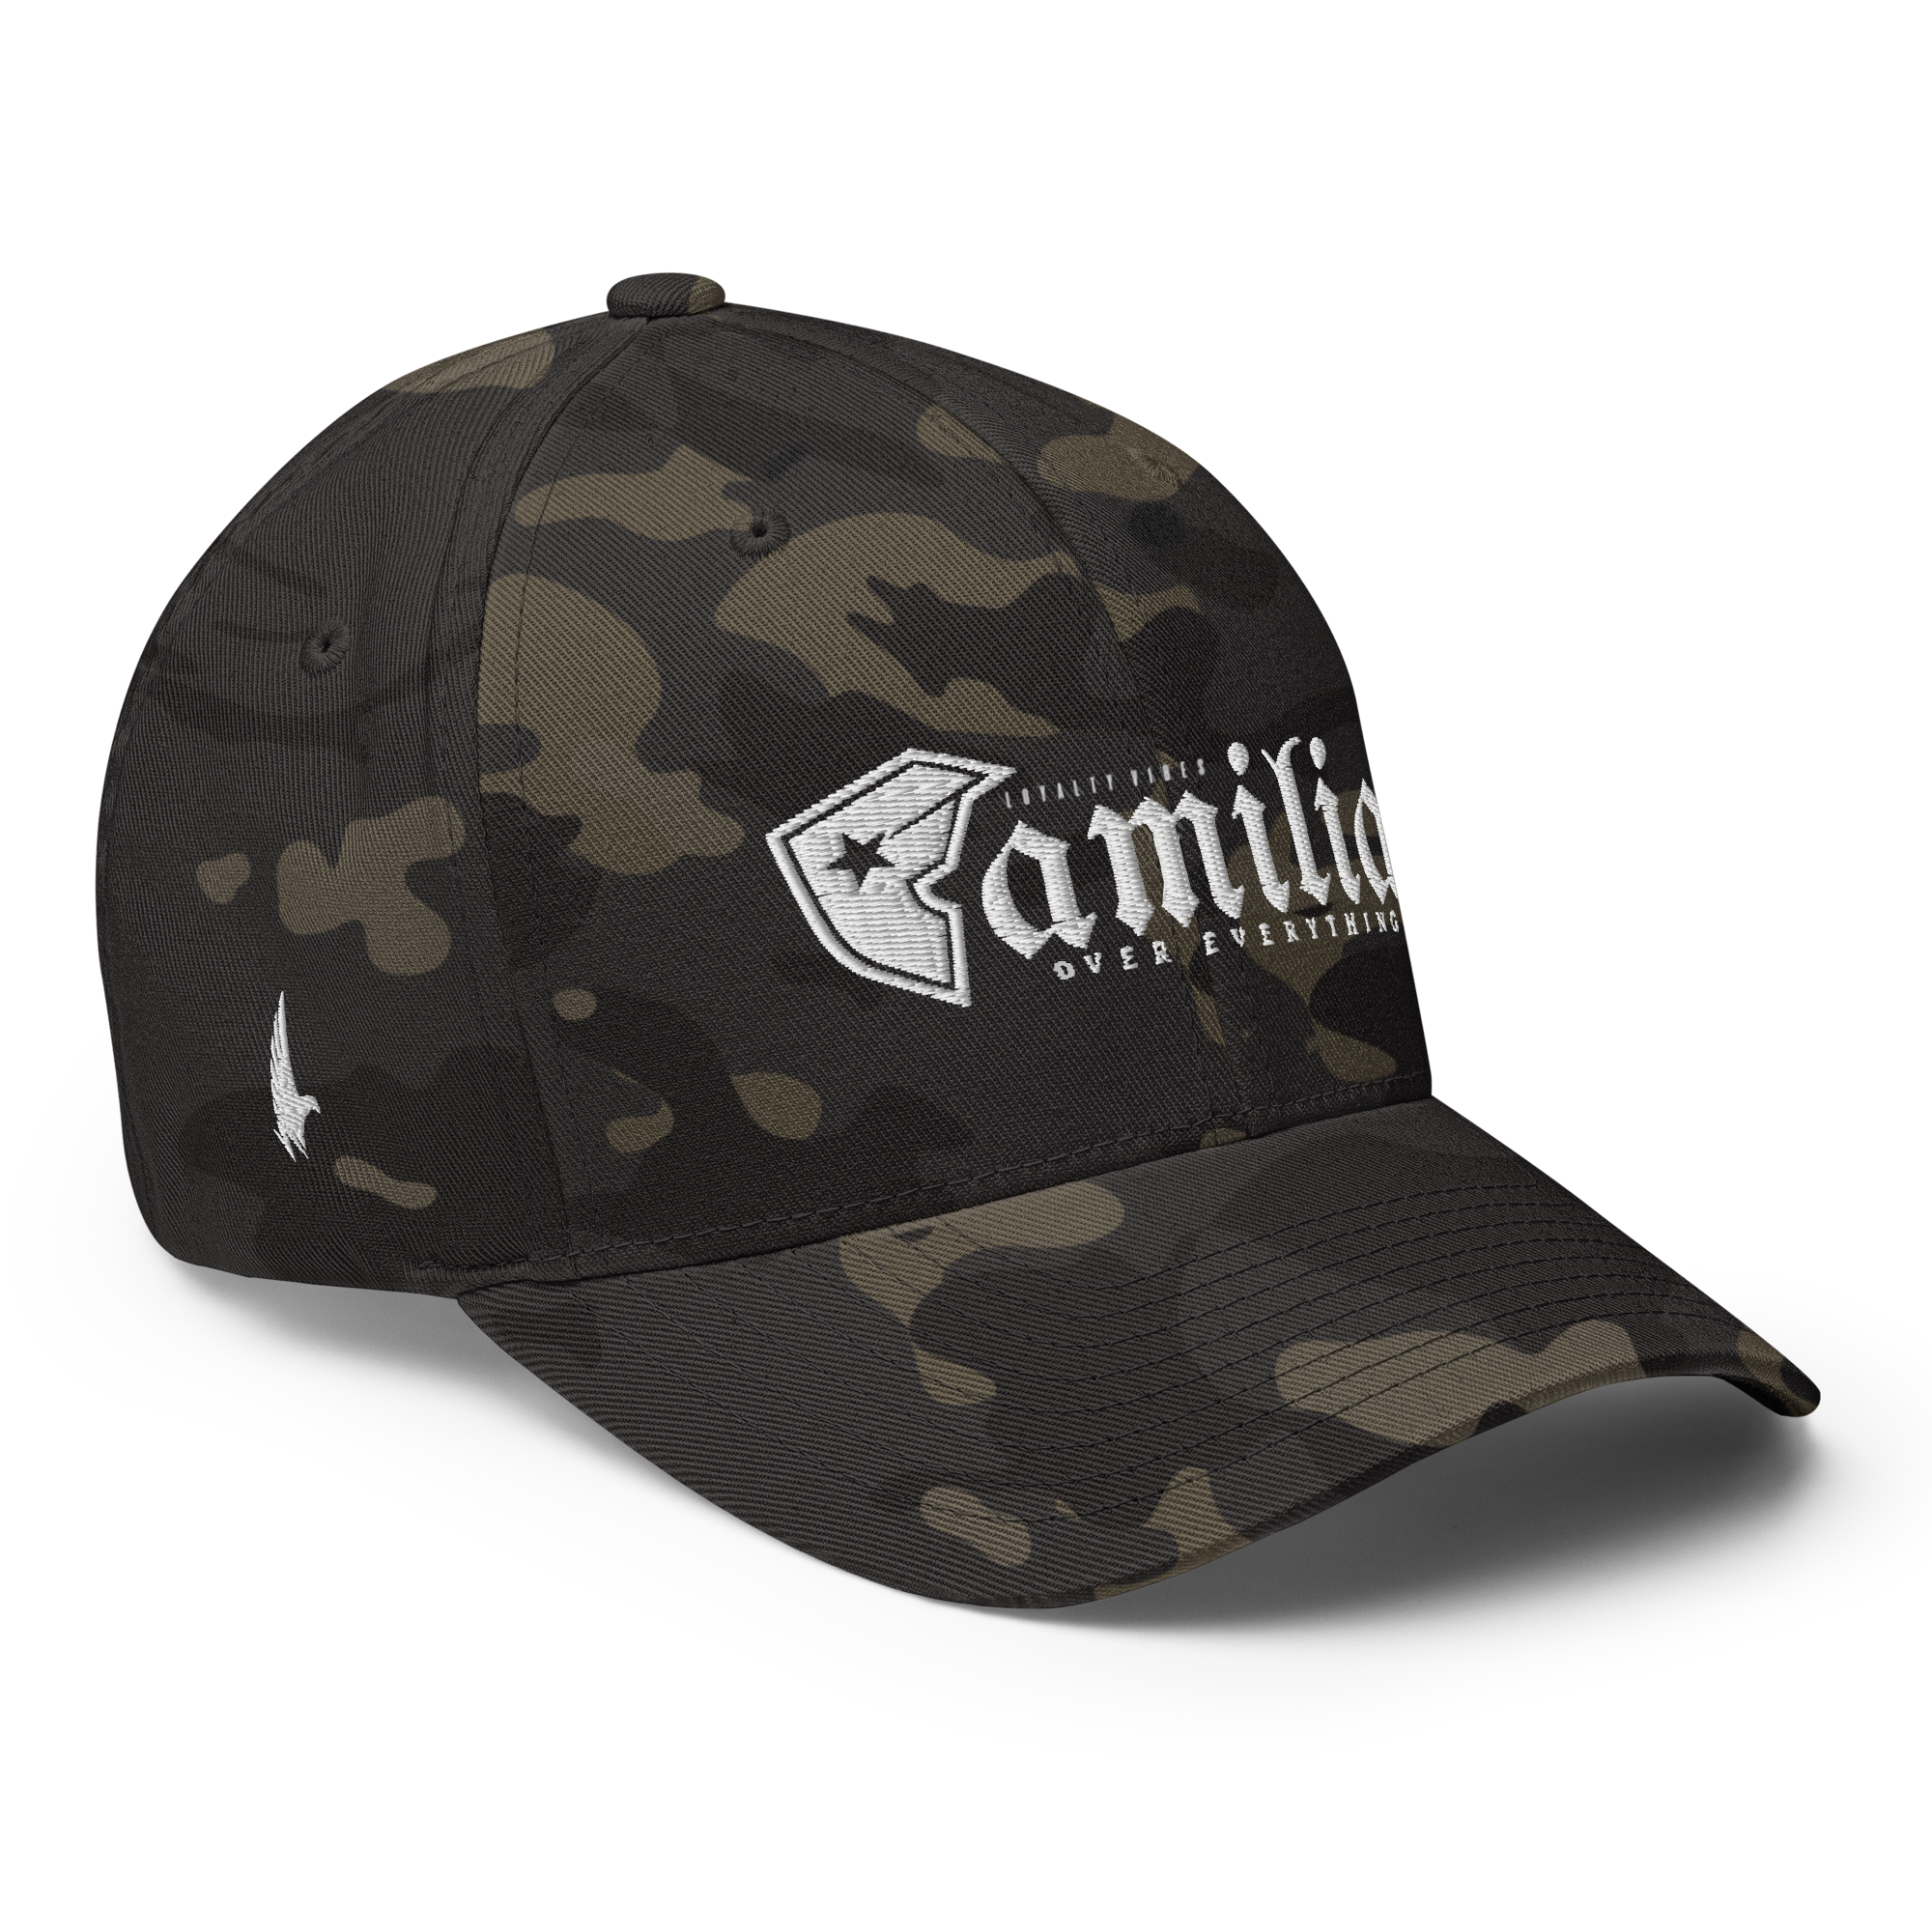 Familia Over Everything Fitted Hat Urban Camo Fitted - Loyalty Vibes